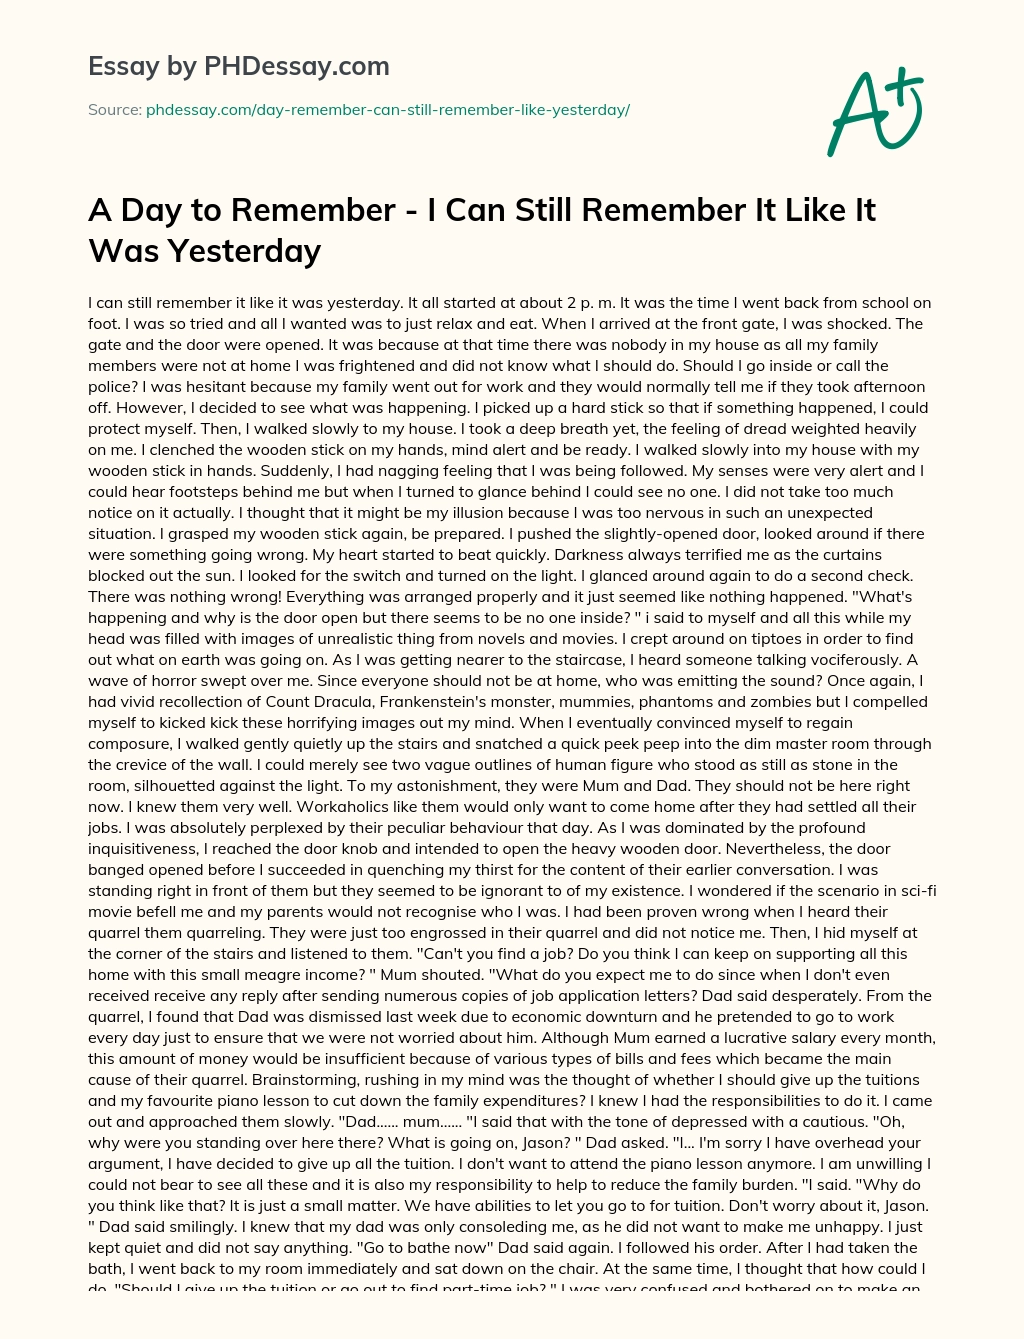 A Day to Remember – I Can Still Remember It Like It Was Yesterday essay